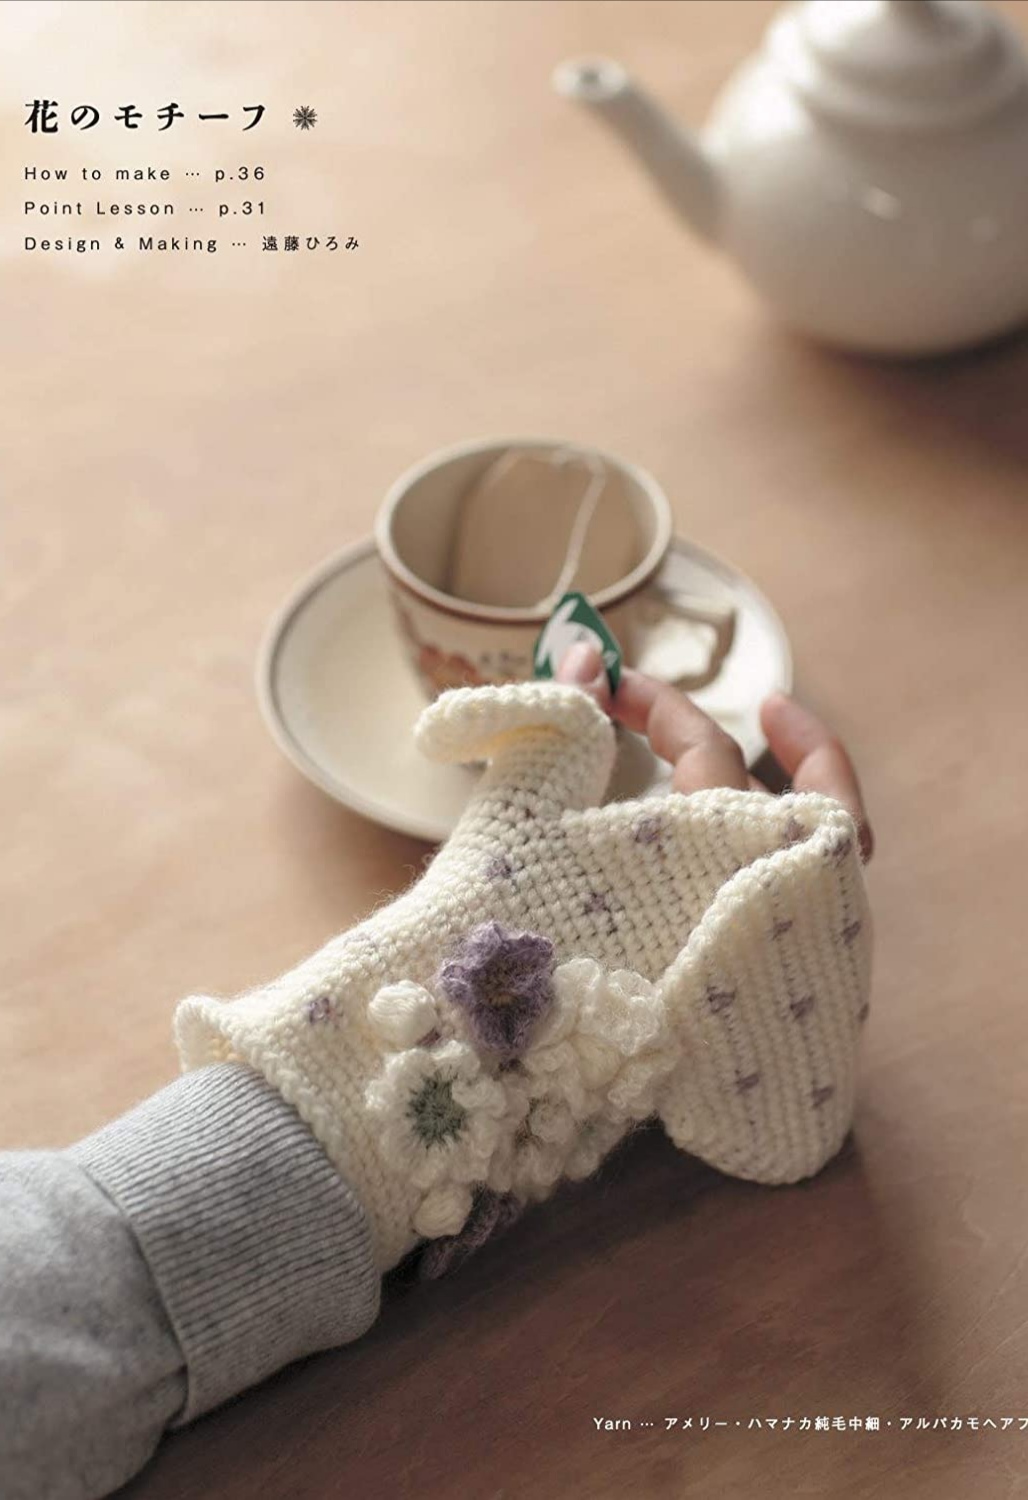 Practical knitting faster than stick needles! Crochet mittens with fingertips